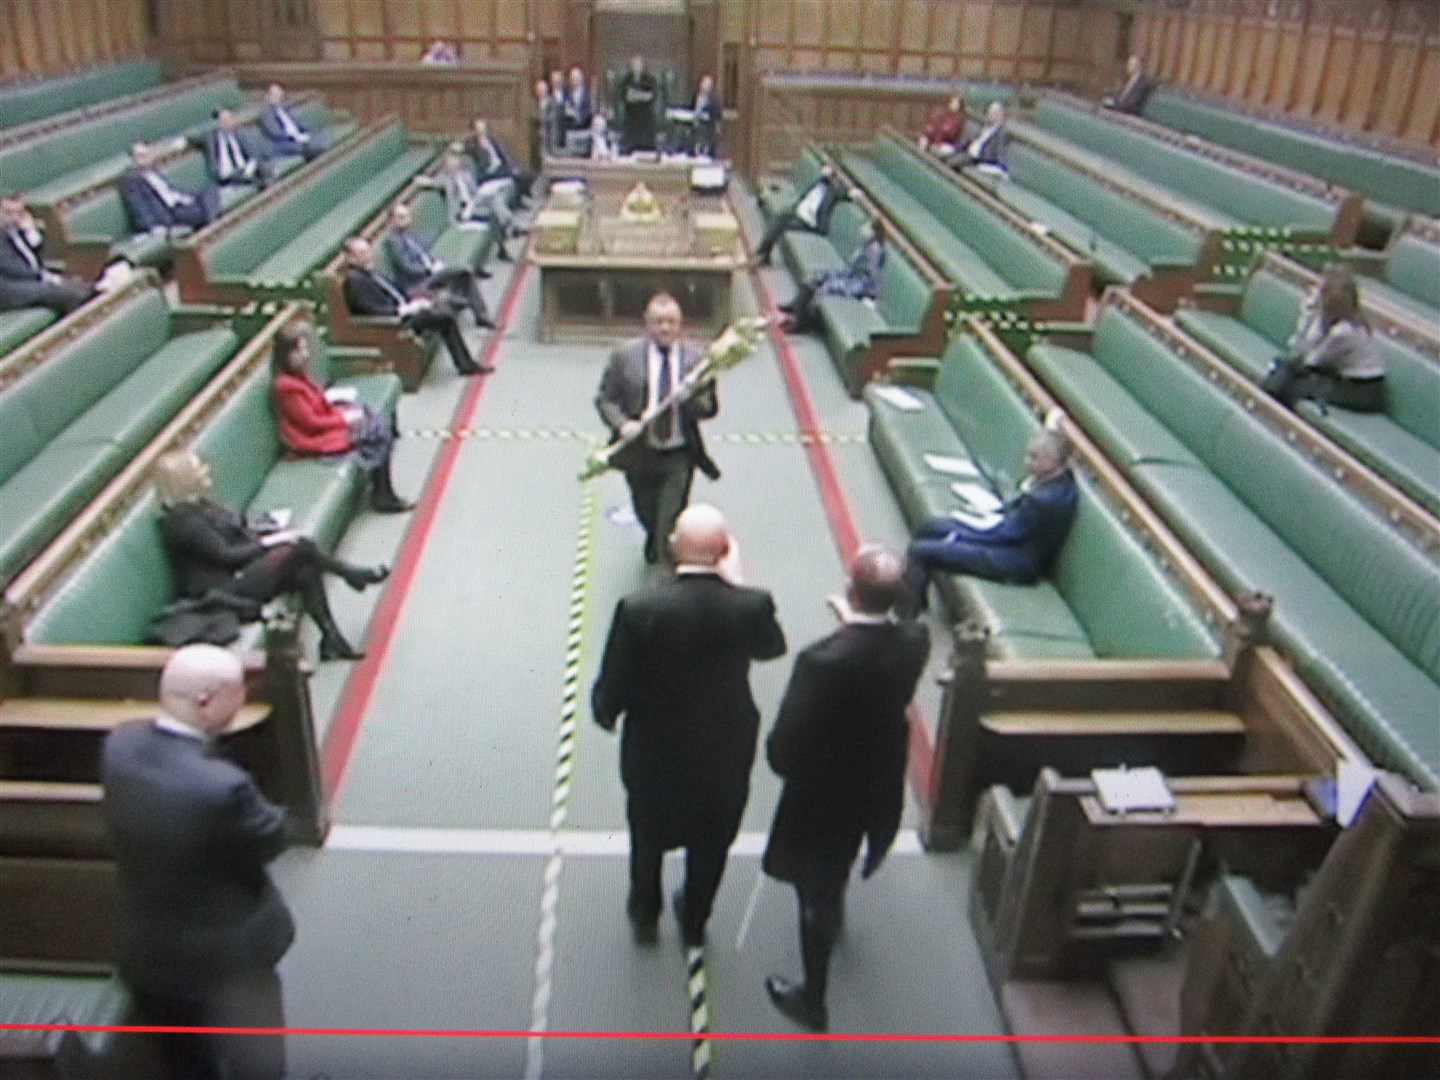 The strath's MP is blocked trying to remove the Mace from the House of Commons